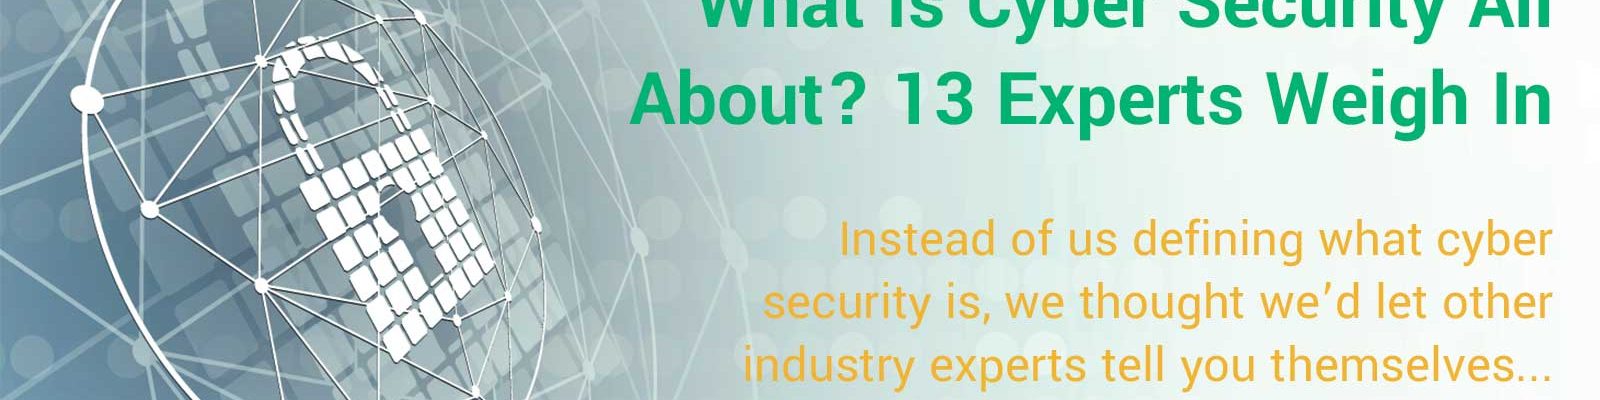 what is cyber security all about feature image of a padlock in the background and the title in the foreground